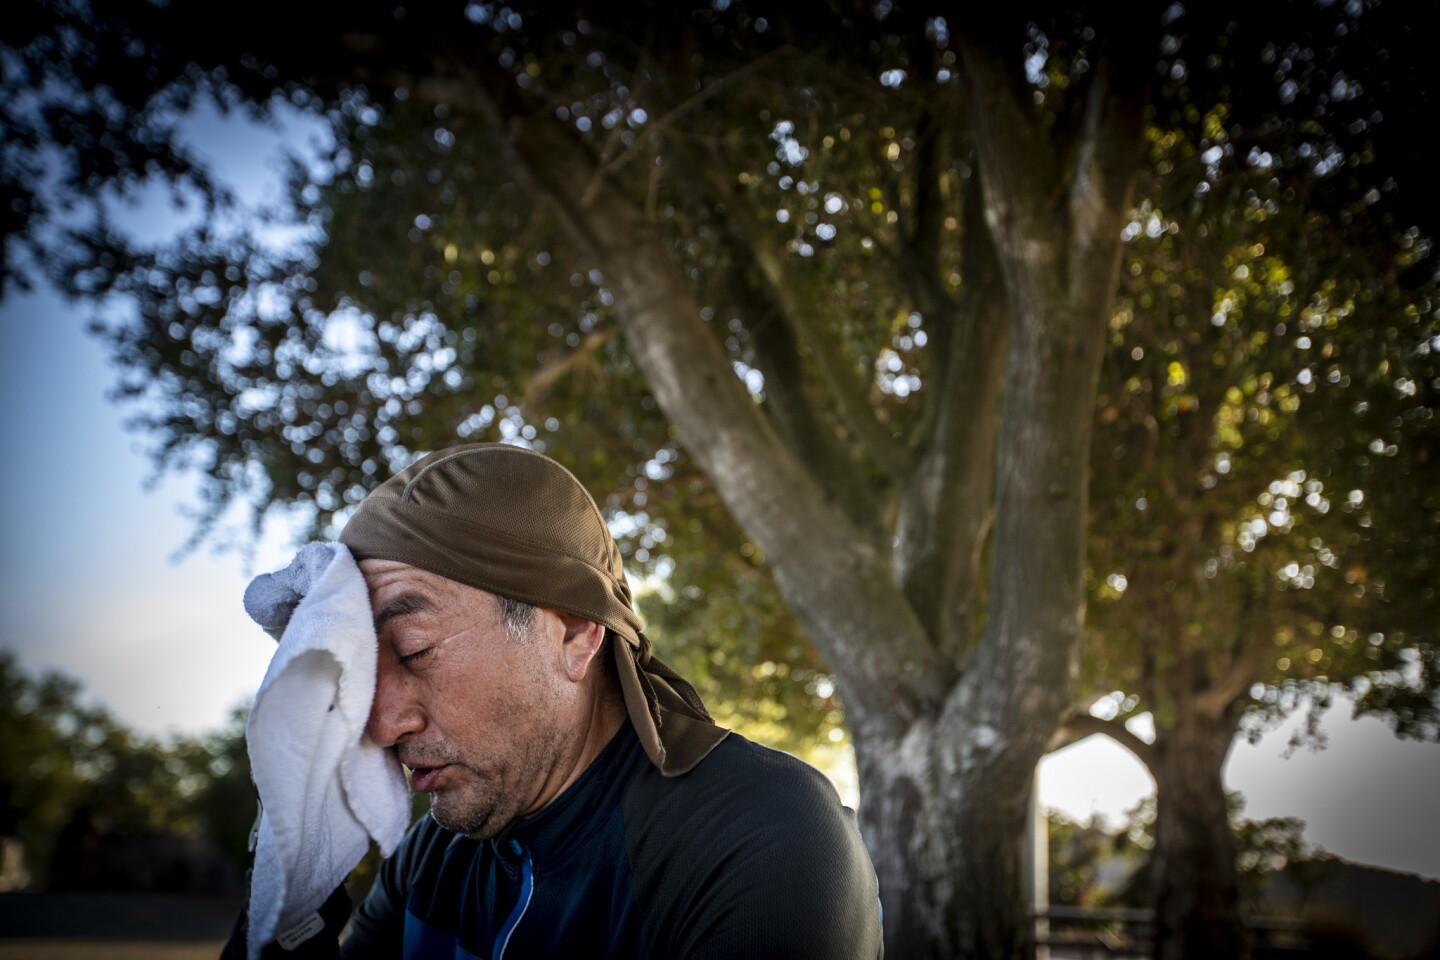 Mountain biker Guillermo Salazar of Reseda wipes sweat from his forehead while taking a break from riding amid temperatures in the 90s at San Vicente Mountain Park in Los Angeles.